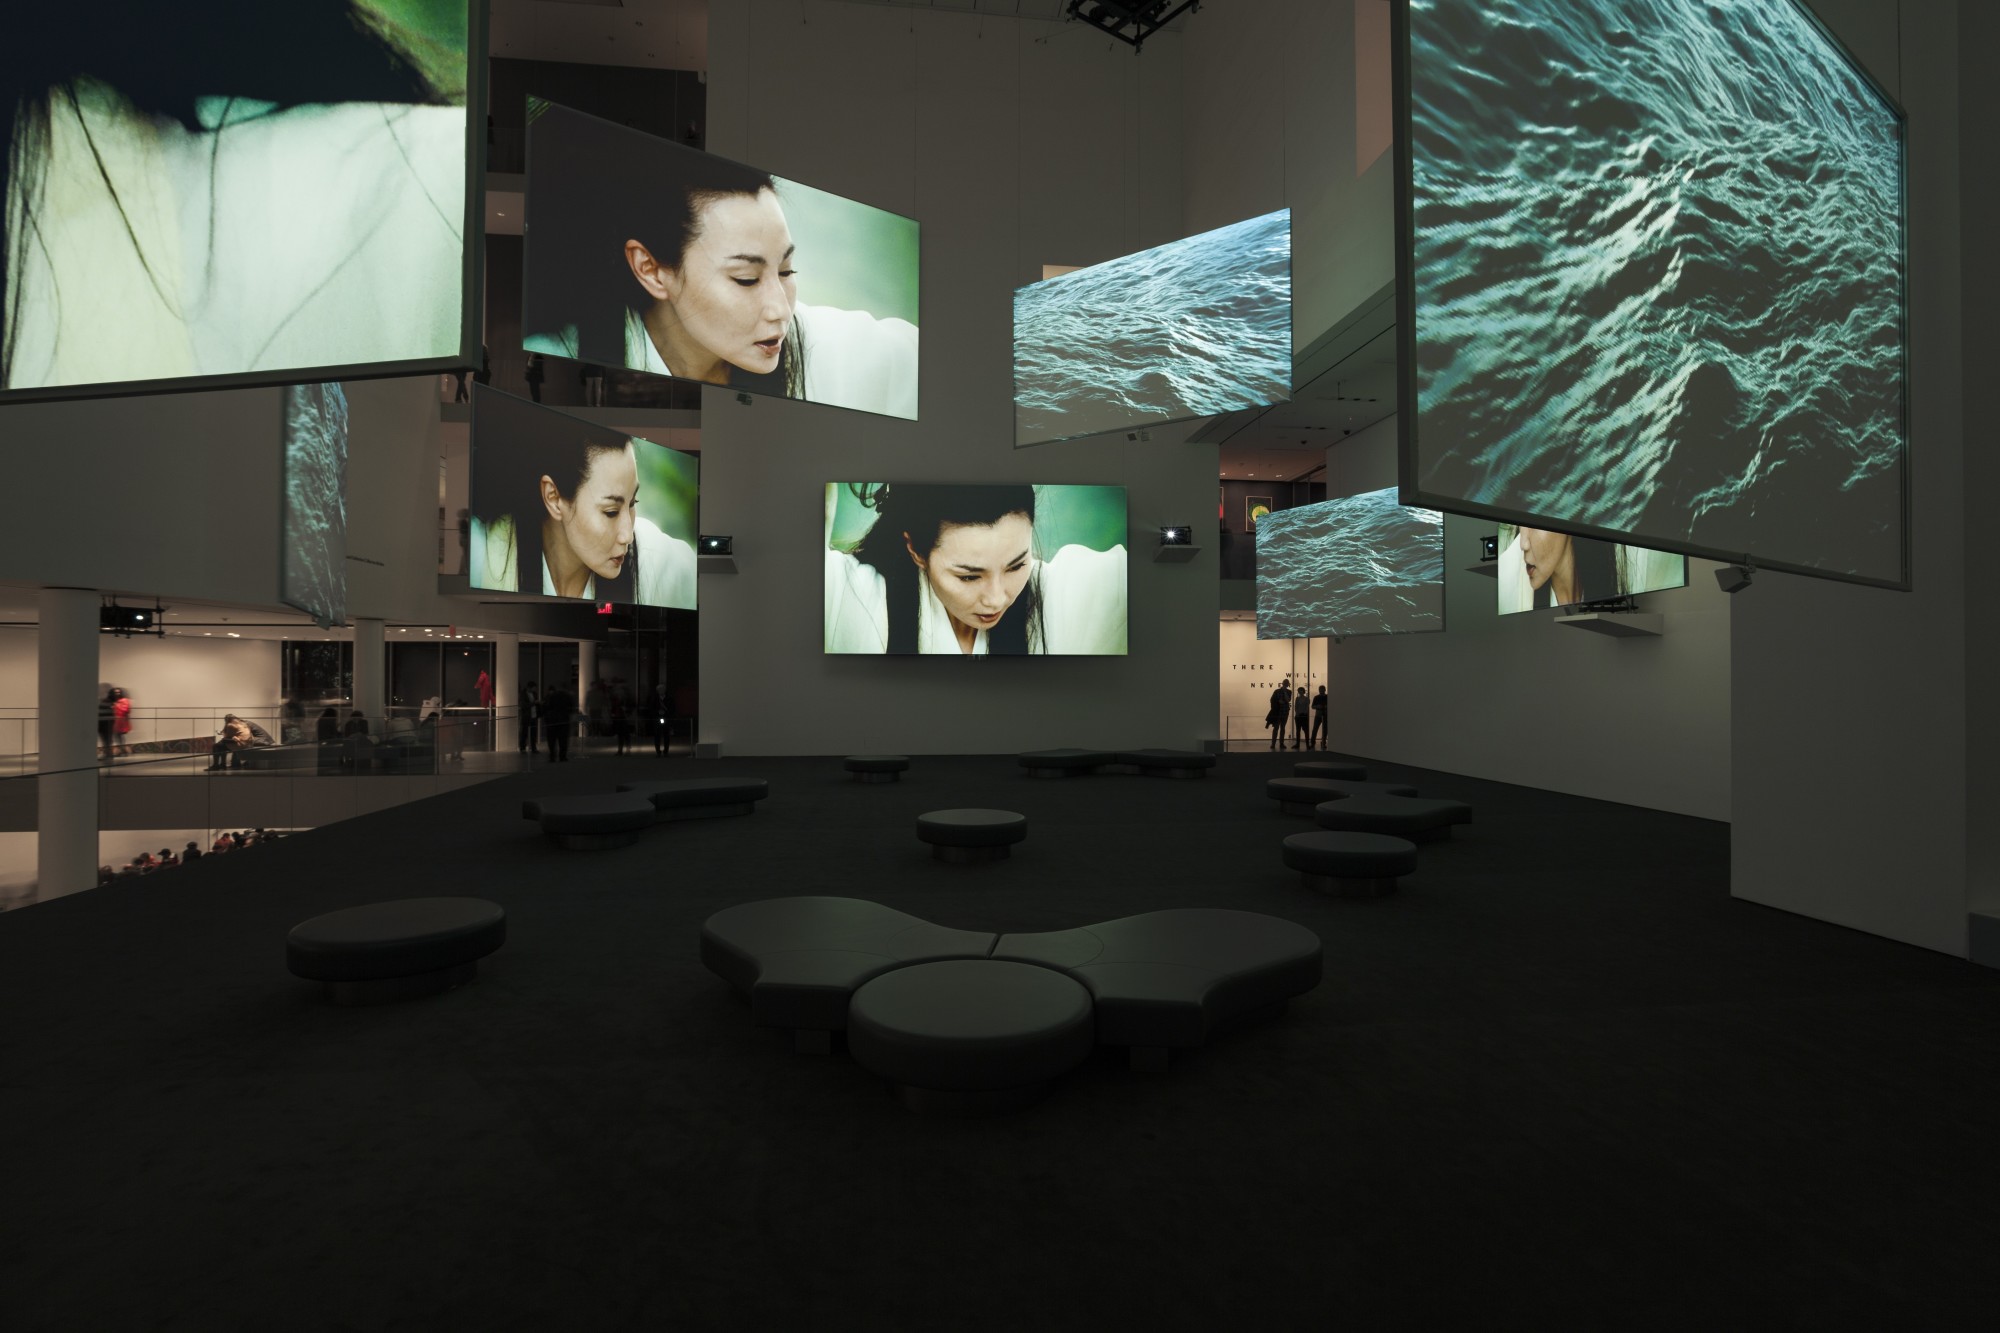 Isaac Julien: Ten Thousand Waves. The Museum of Modern Art (MoMA), New York, 2013-14  49'41'', nine-screen installation, 35mm film transferred to digital, colour, 9.2 sound